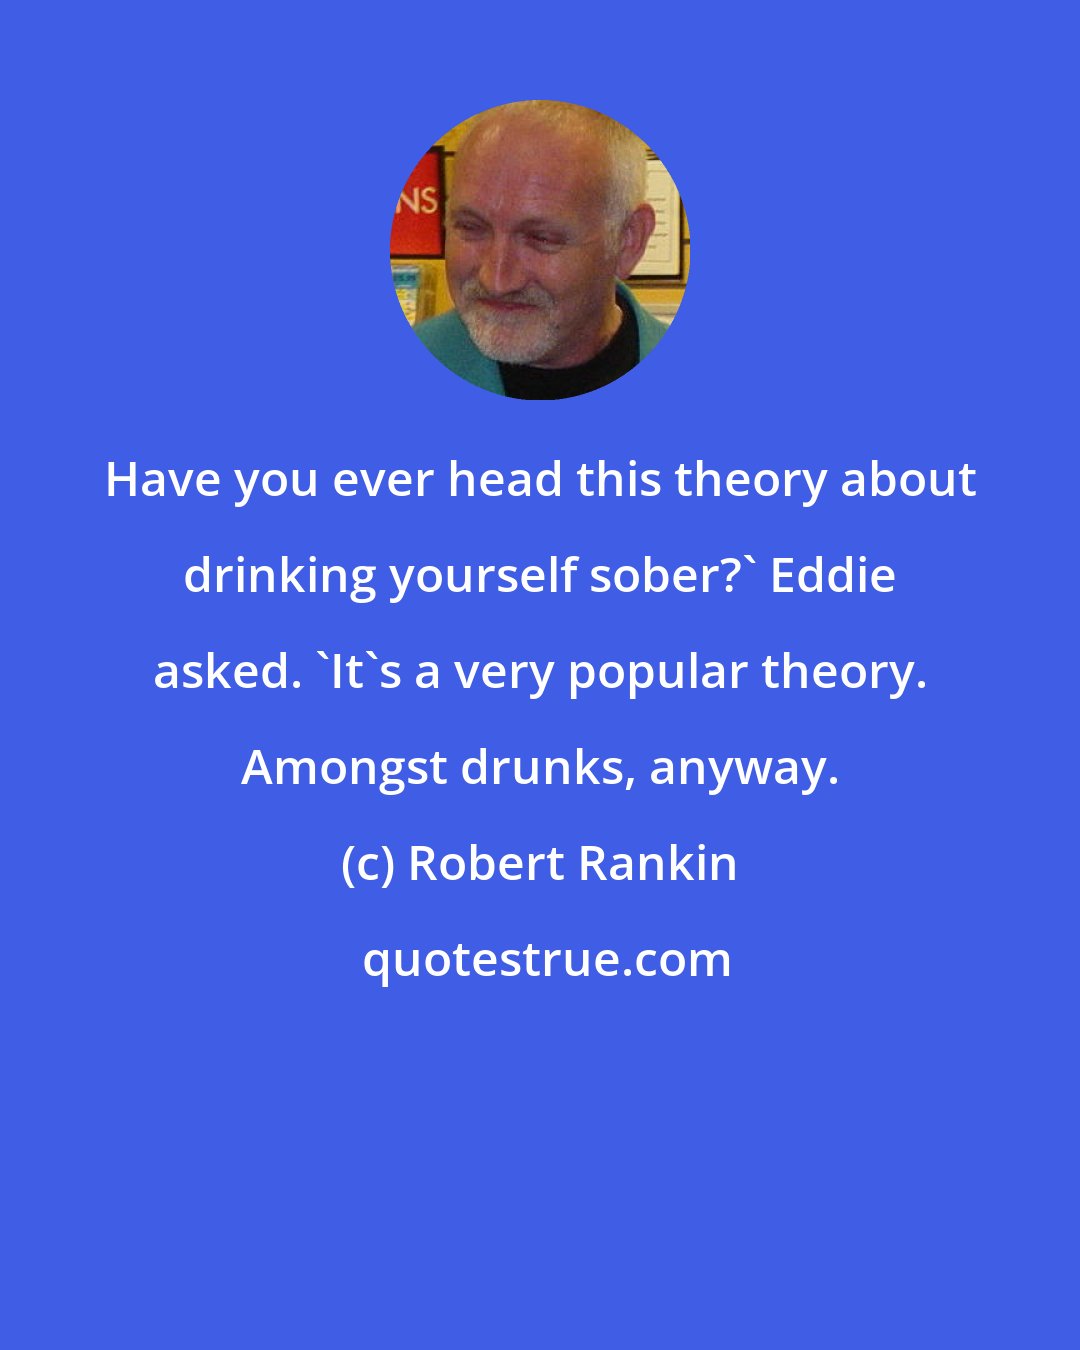 Robert Rankin: Have you ever head this theory about drinking yourself sober?' Eddie asked. 'It's a very popular theory. Amongst drunks, anyway.